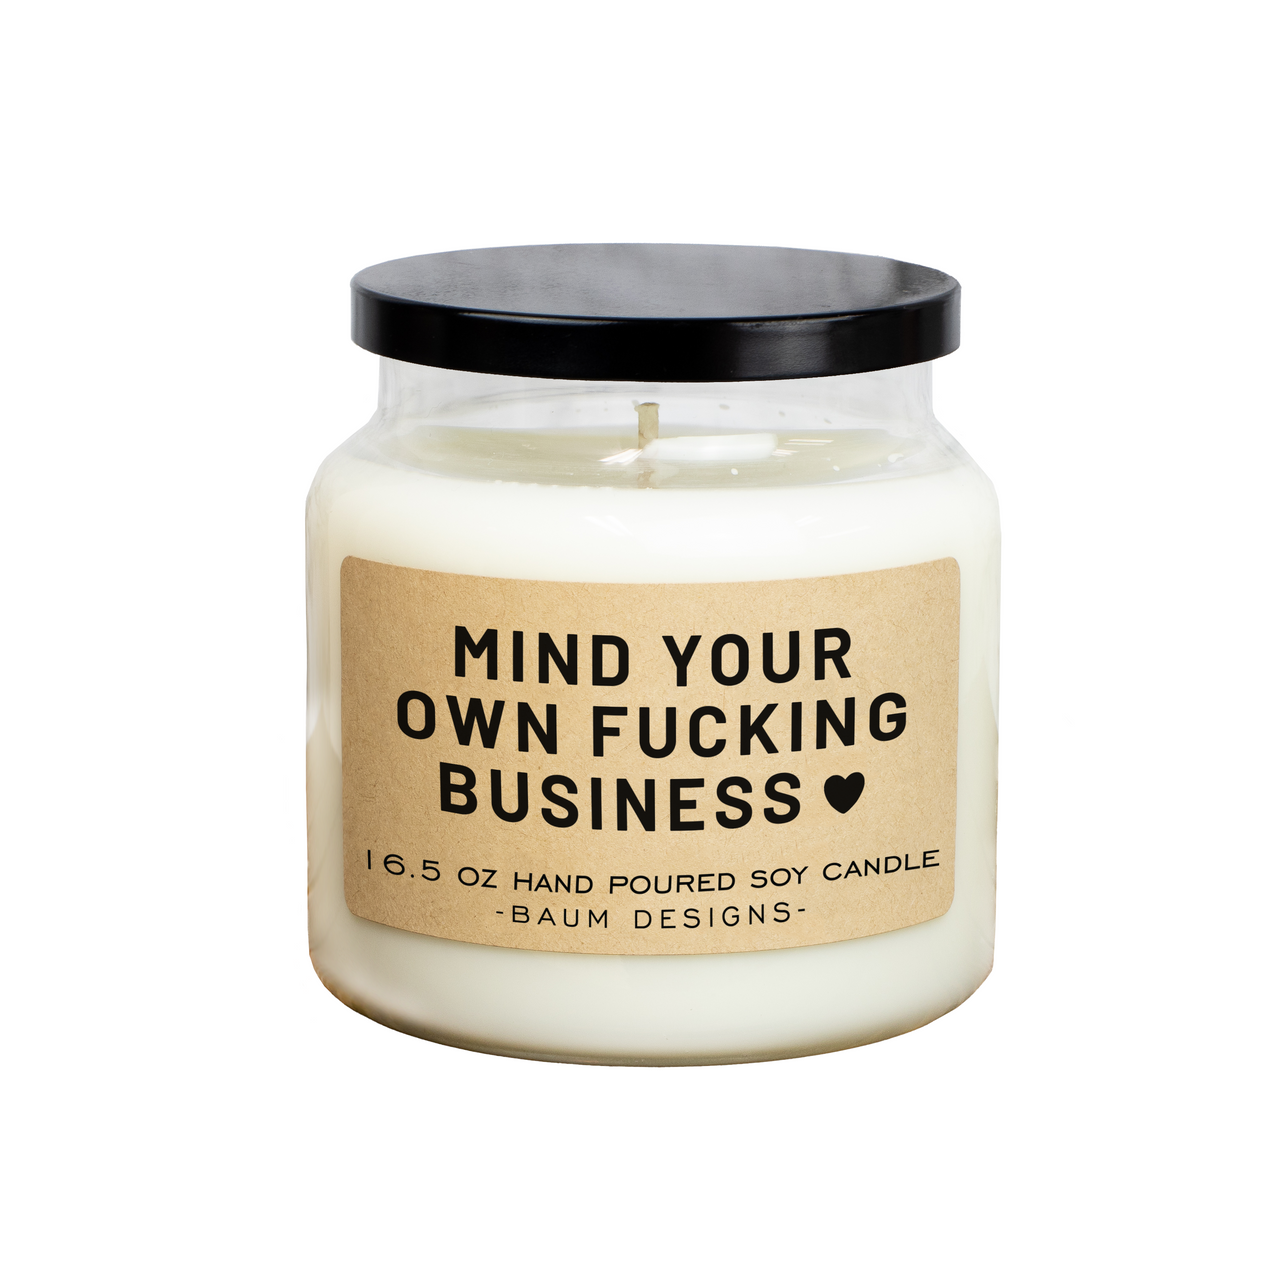 Mind Your Own Fucking Business Soy Candle Baum Designs